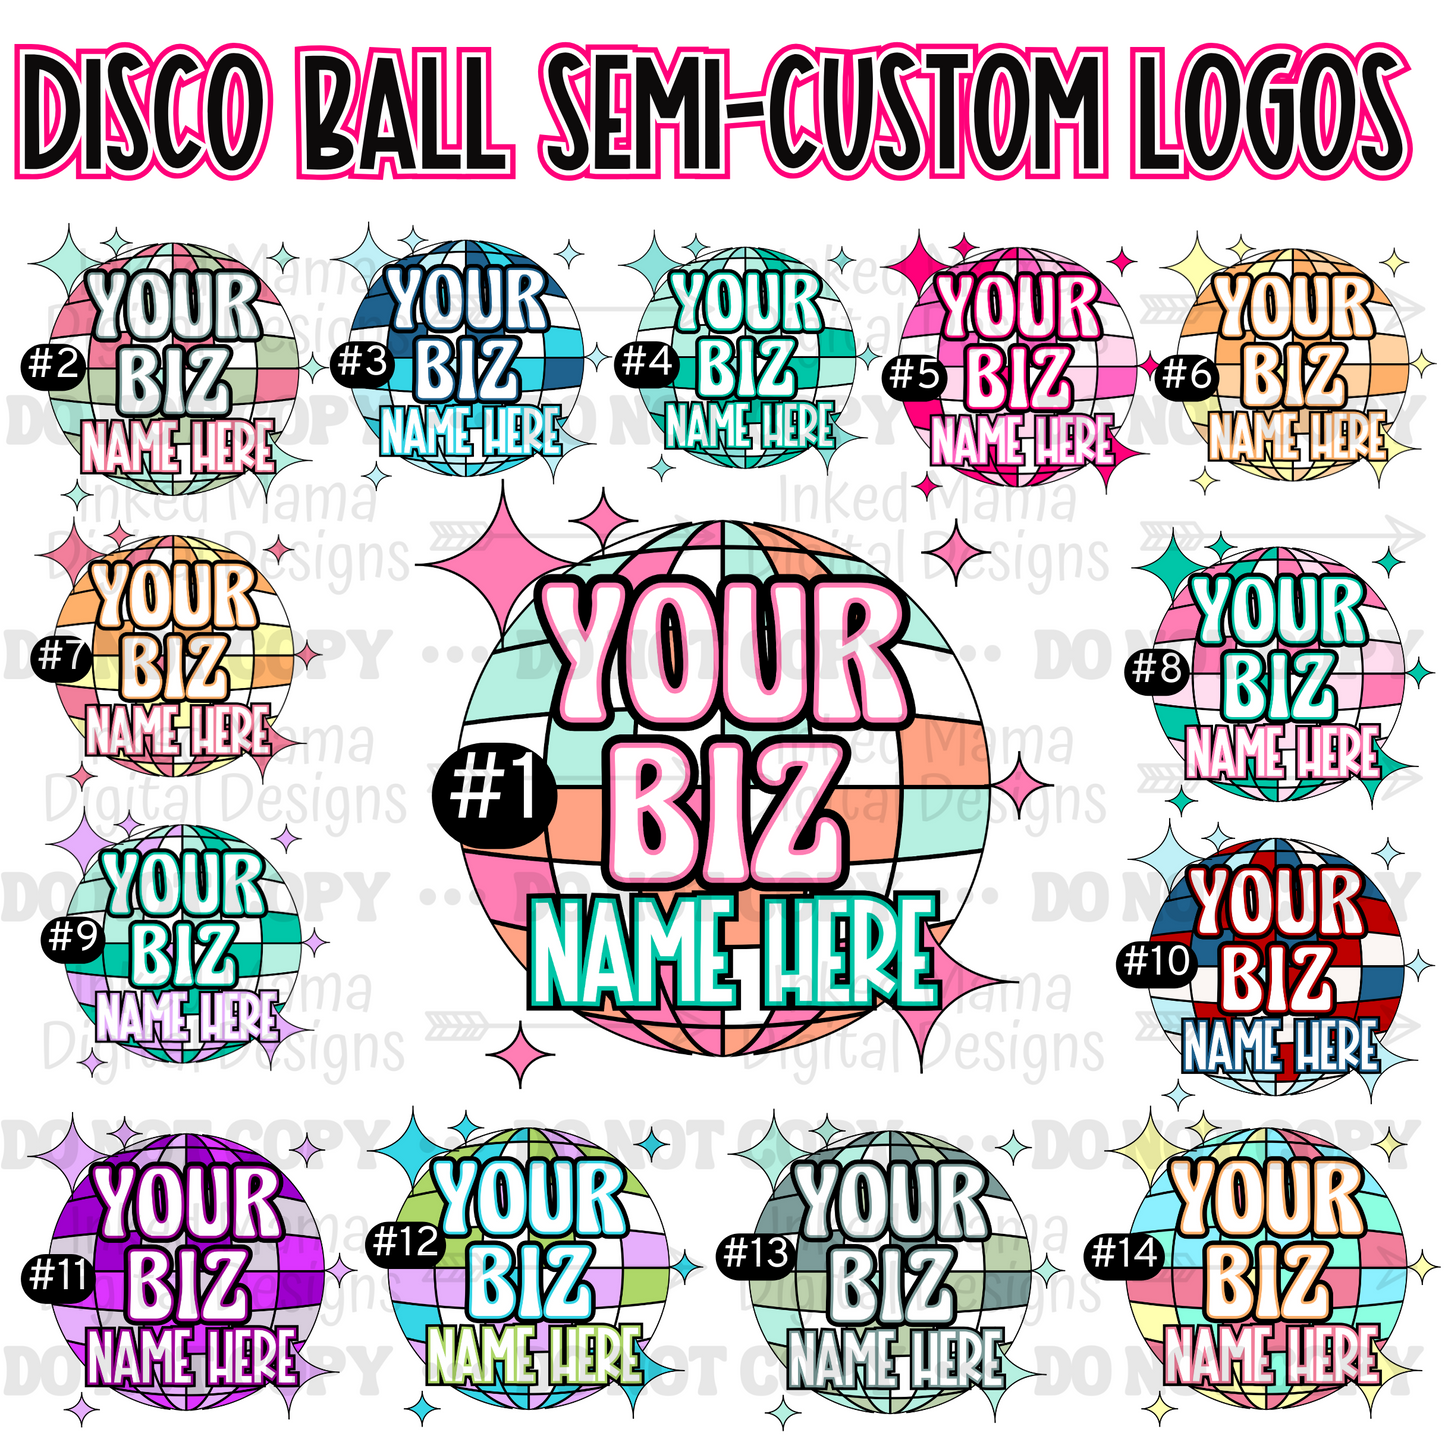 Disco Ball Logo Small Business Full Color Printed Vinyl Stickers